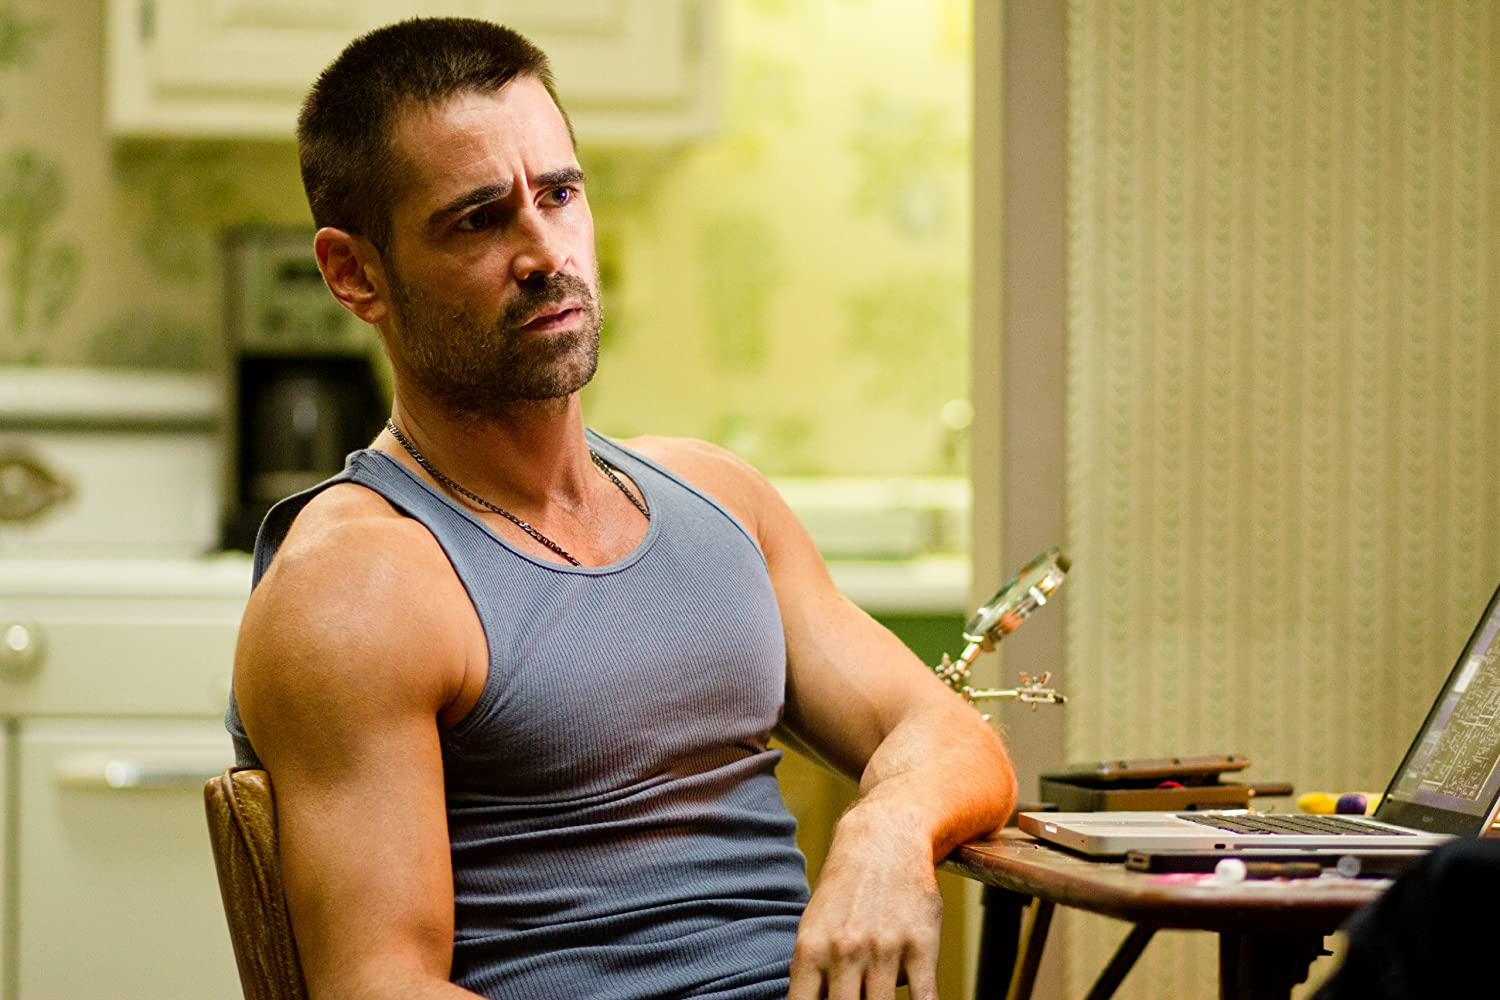 Colin Farrell Has One Of Netflix’s Most Popular Movies This Week